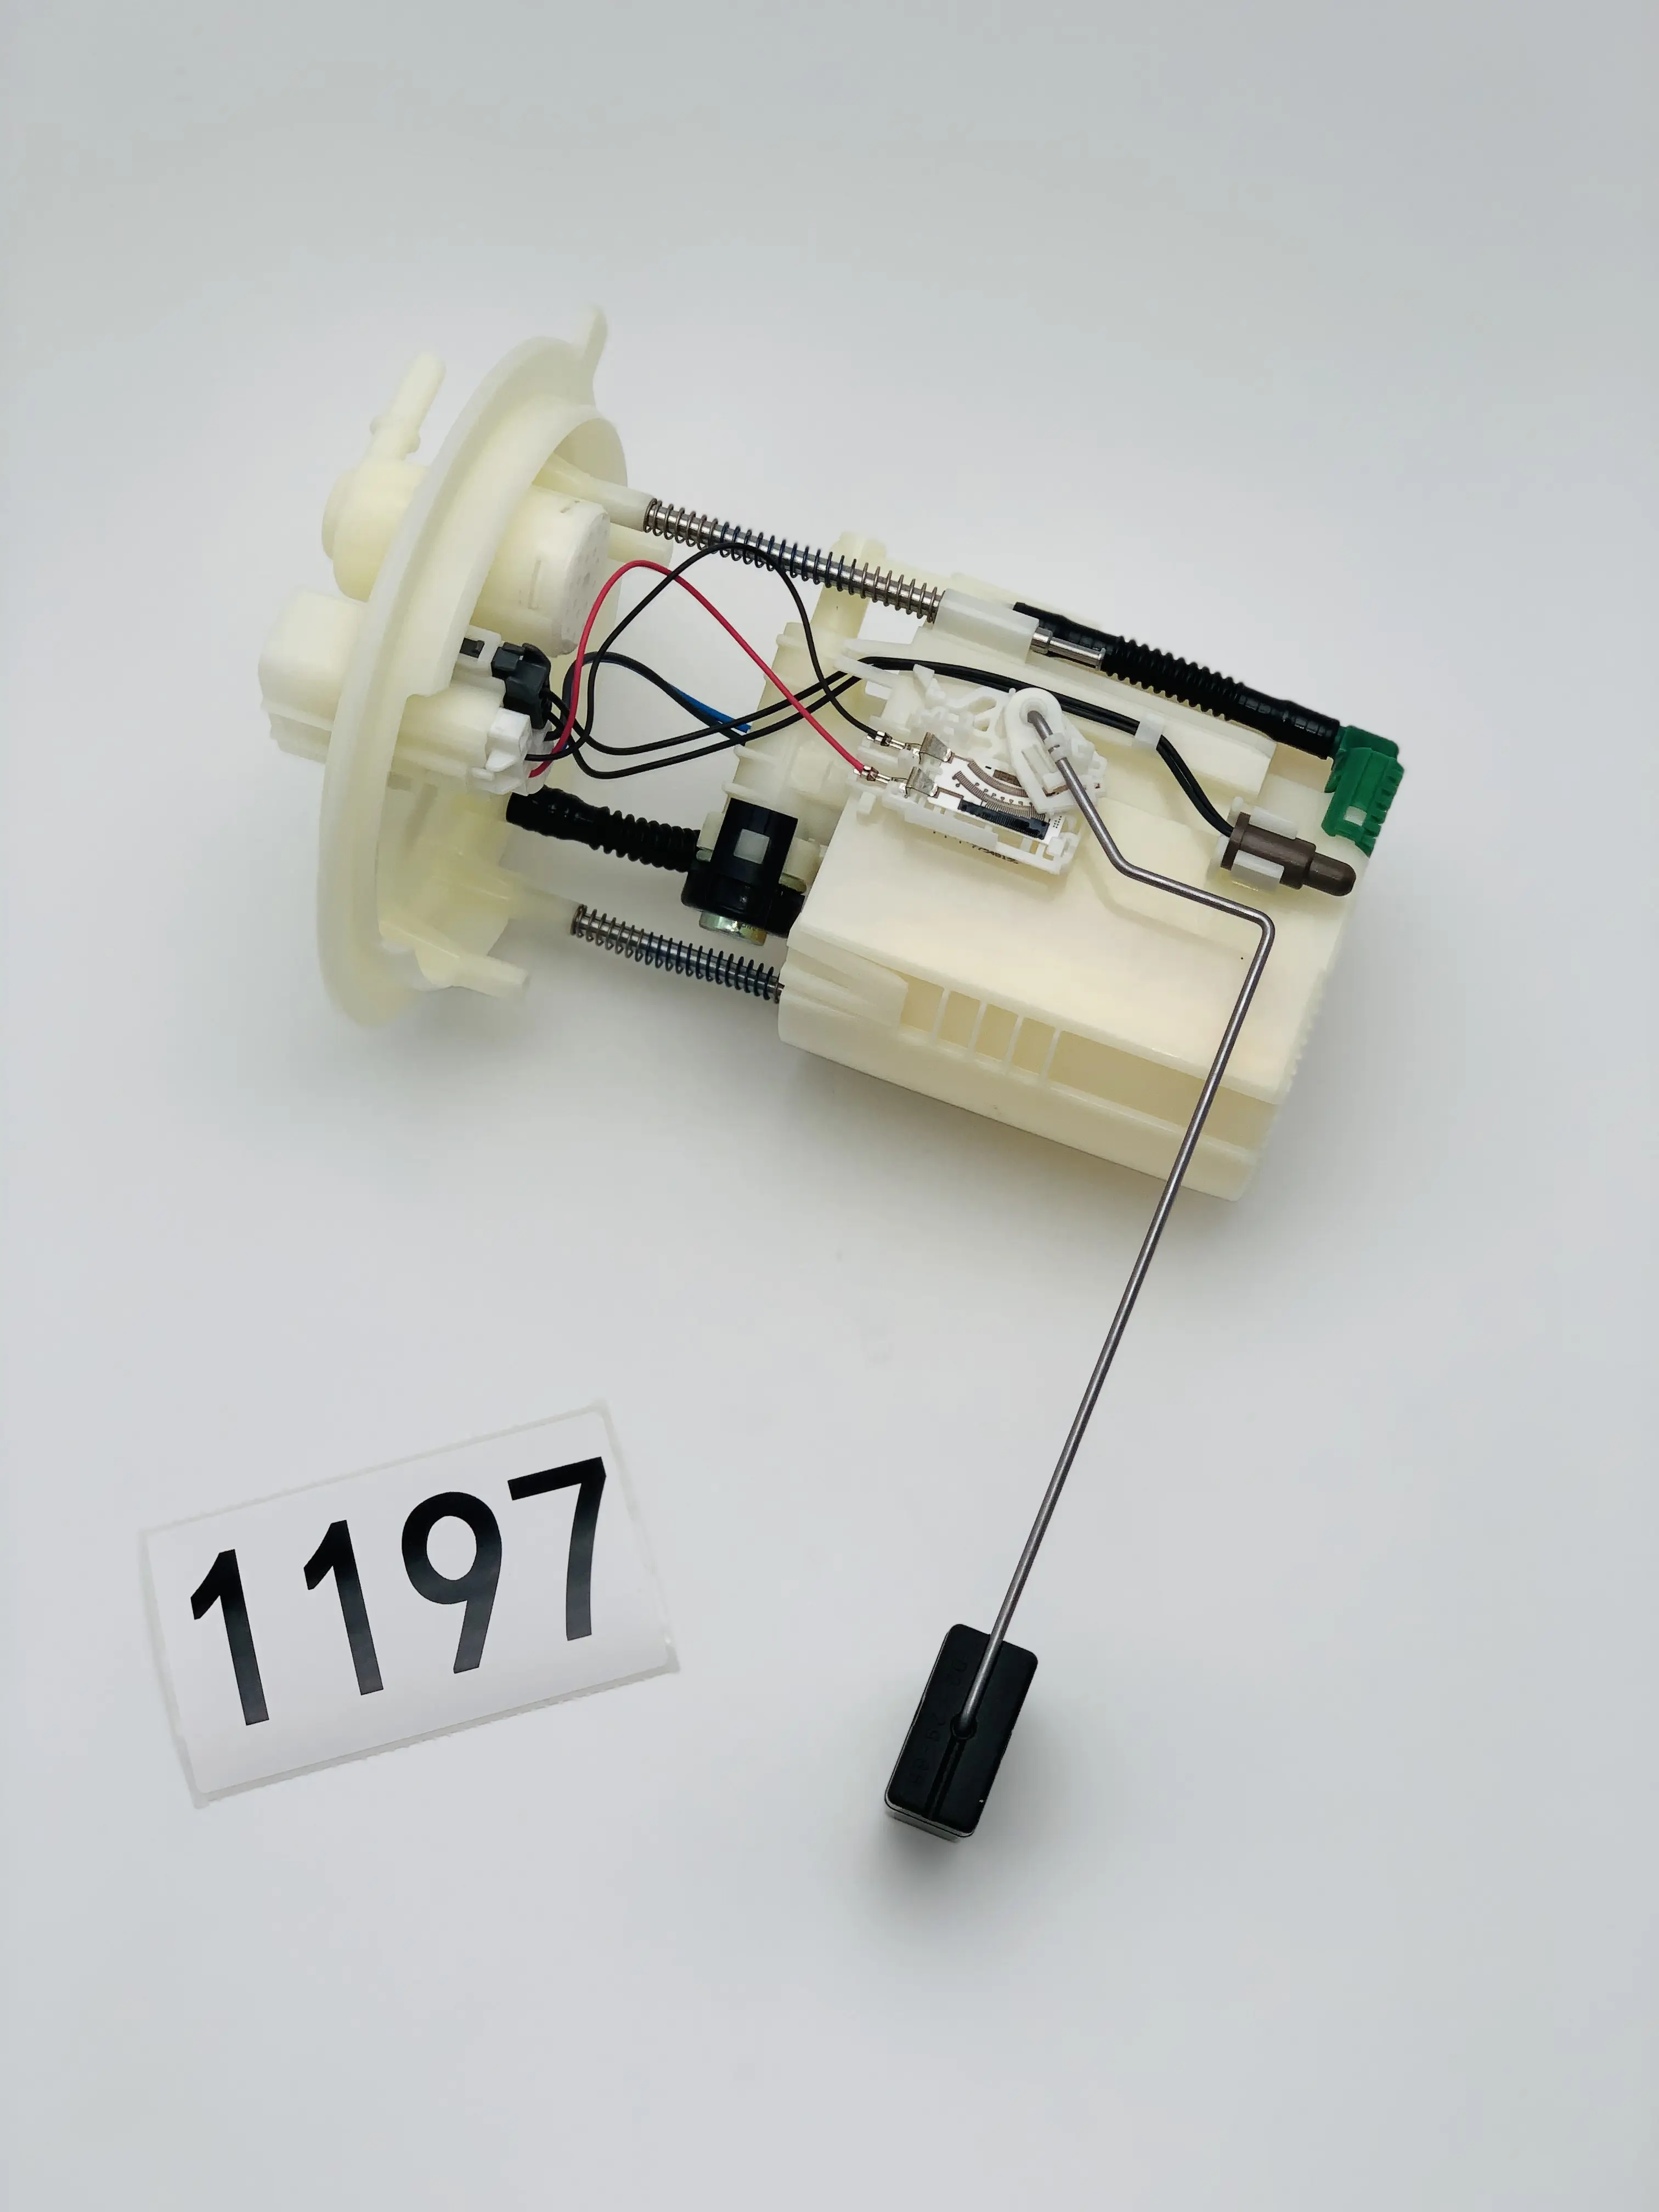 KS-A1197 HIGH Quality Fuel Pump Assembly for Nissan 2020 Teana Country VI